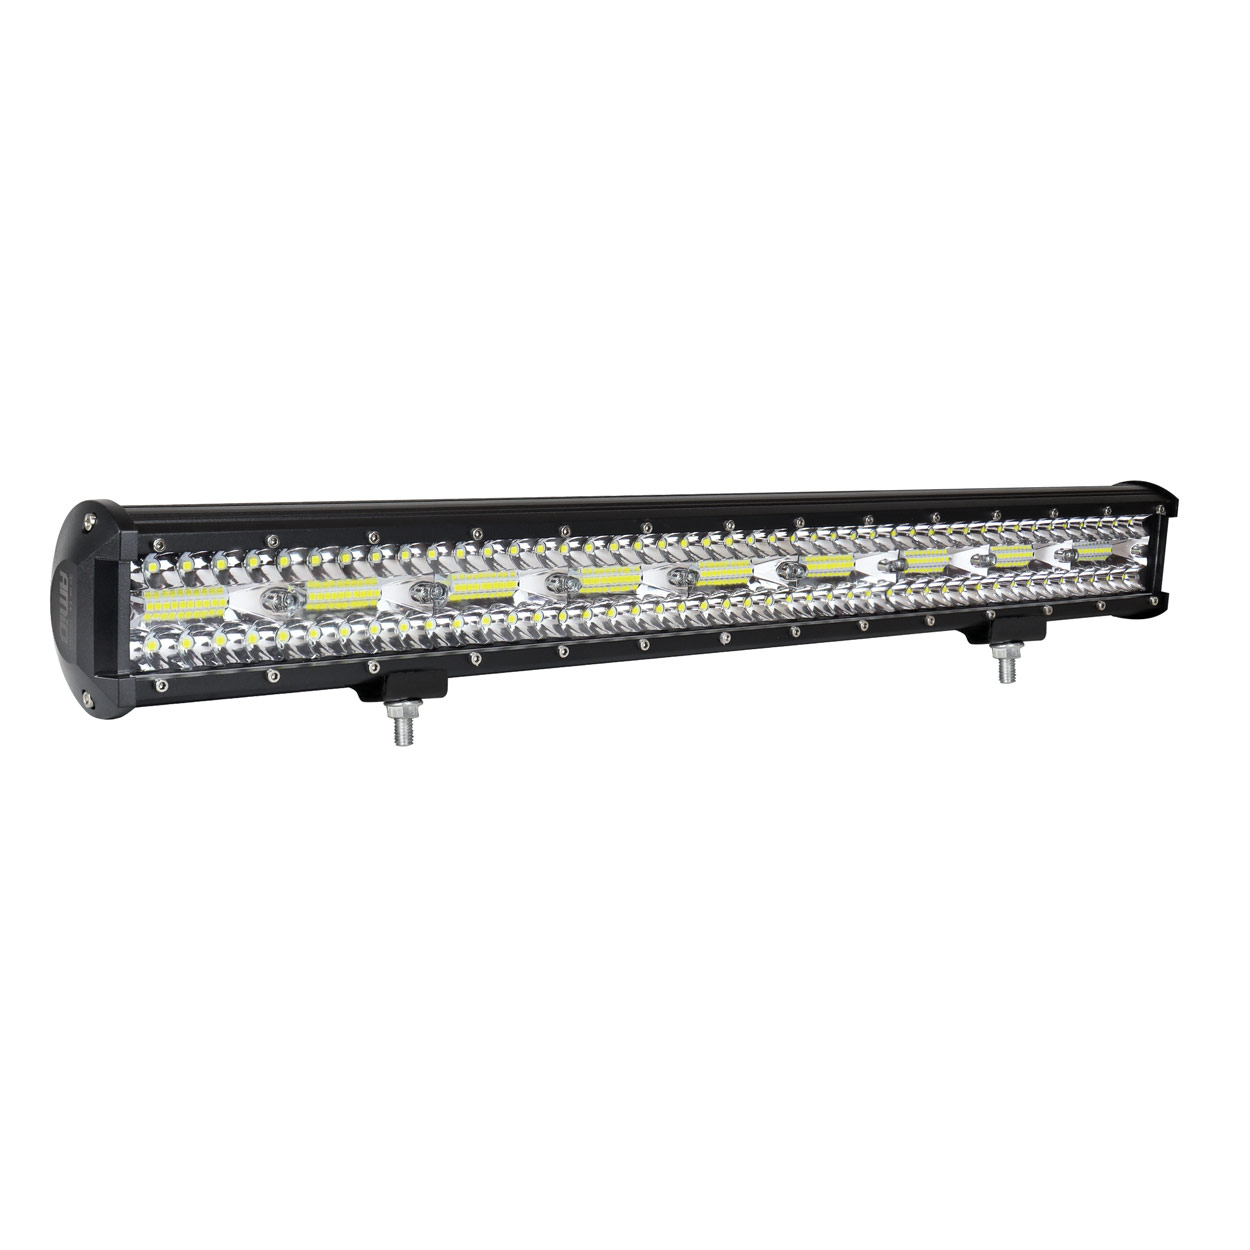 02543/AM ΠΡΟΒΟΛΕΑΣ ΕΡΓΑΣΙΑΣ WORKING LAMP 160xSMD LED 9>36V 54.000lm 6.000>6.500K 650x74x63mm AWL29 AMIO